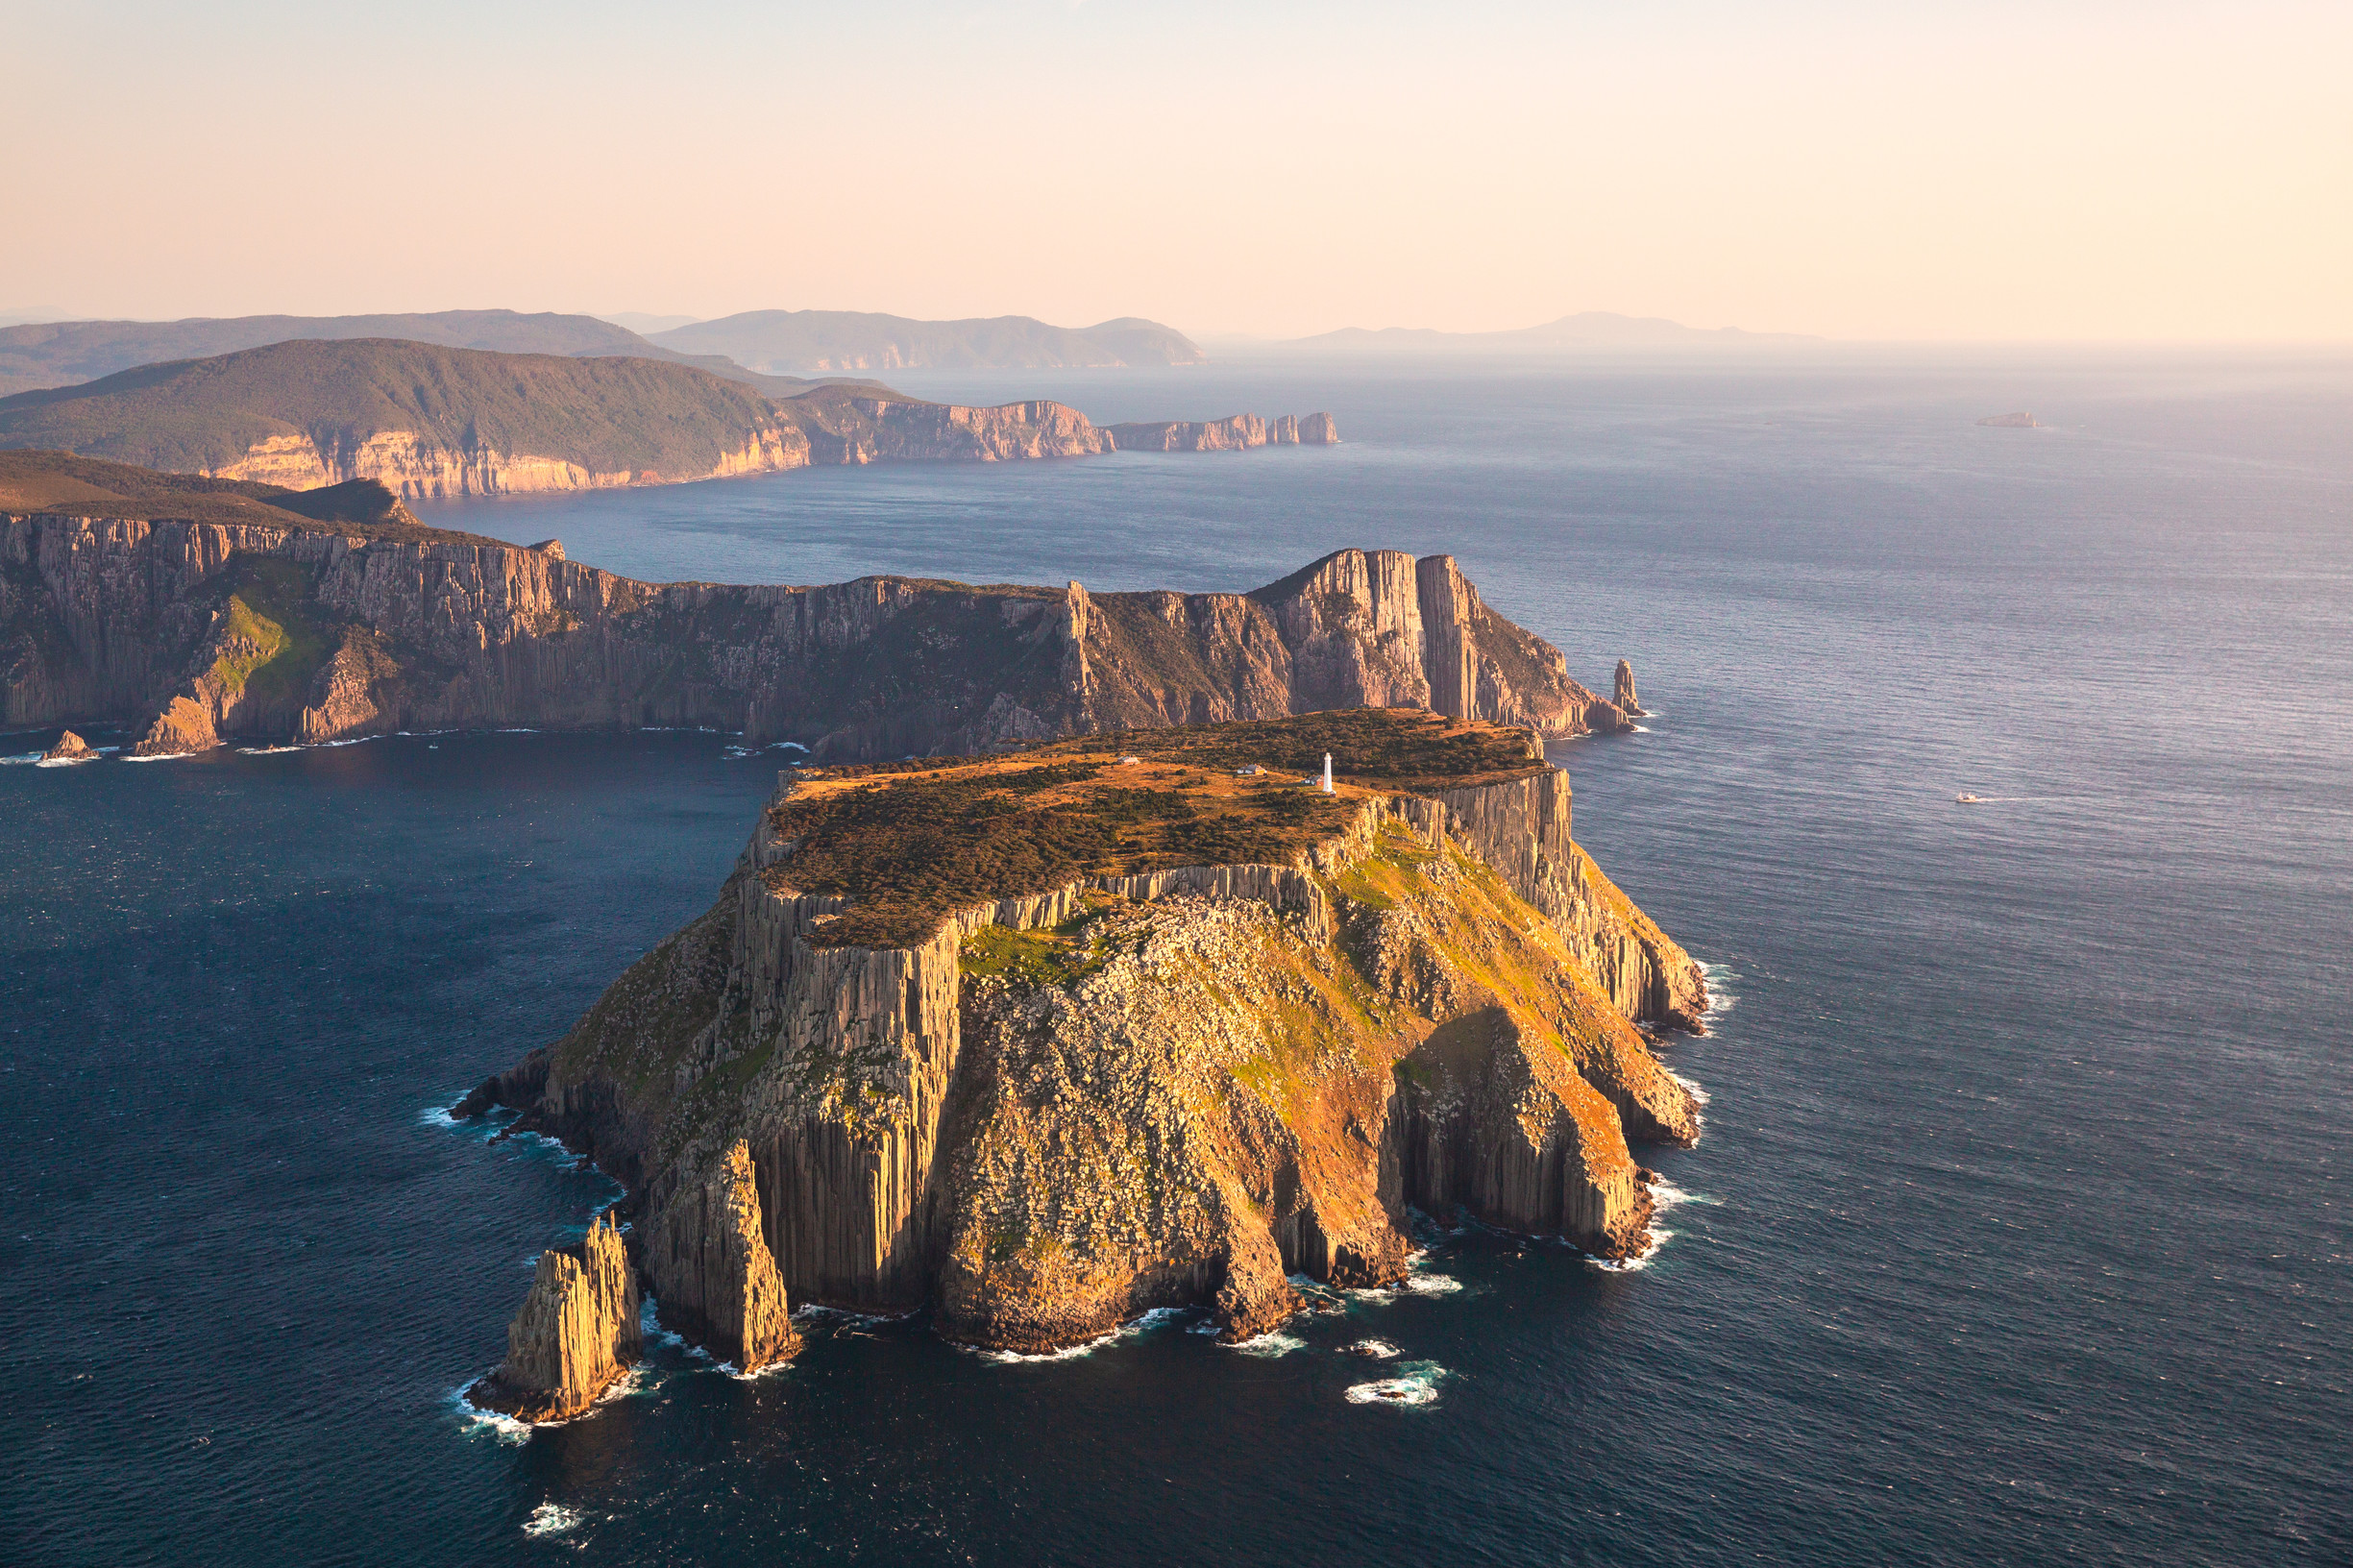 Tasmania: Great Reasons to Travel the Island State